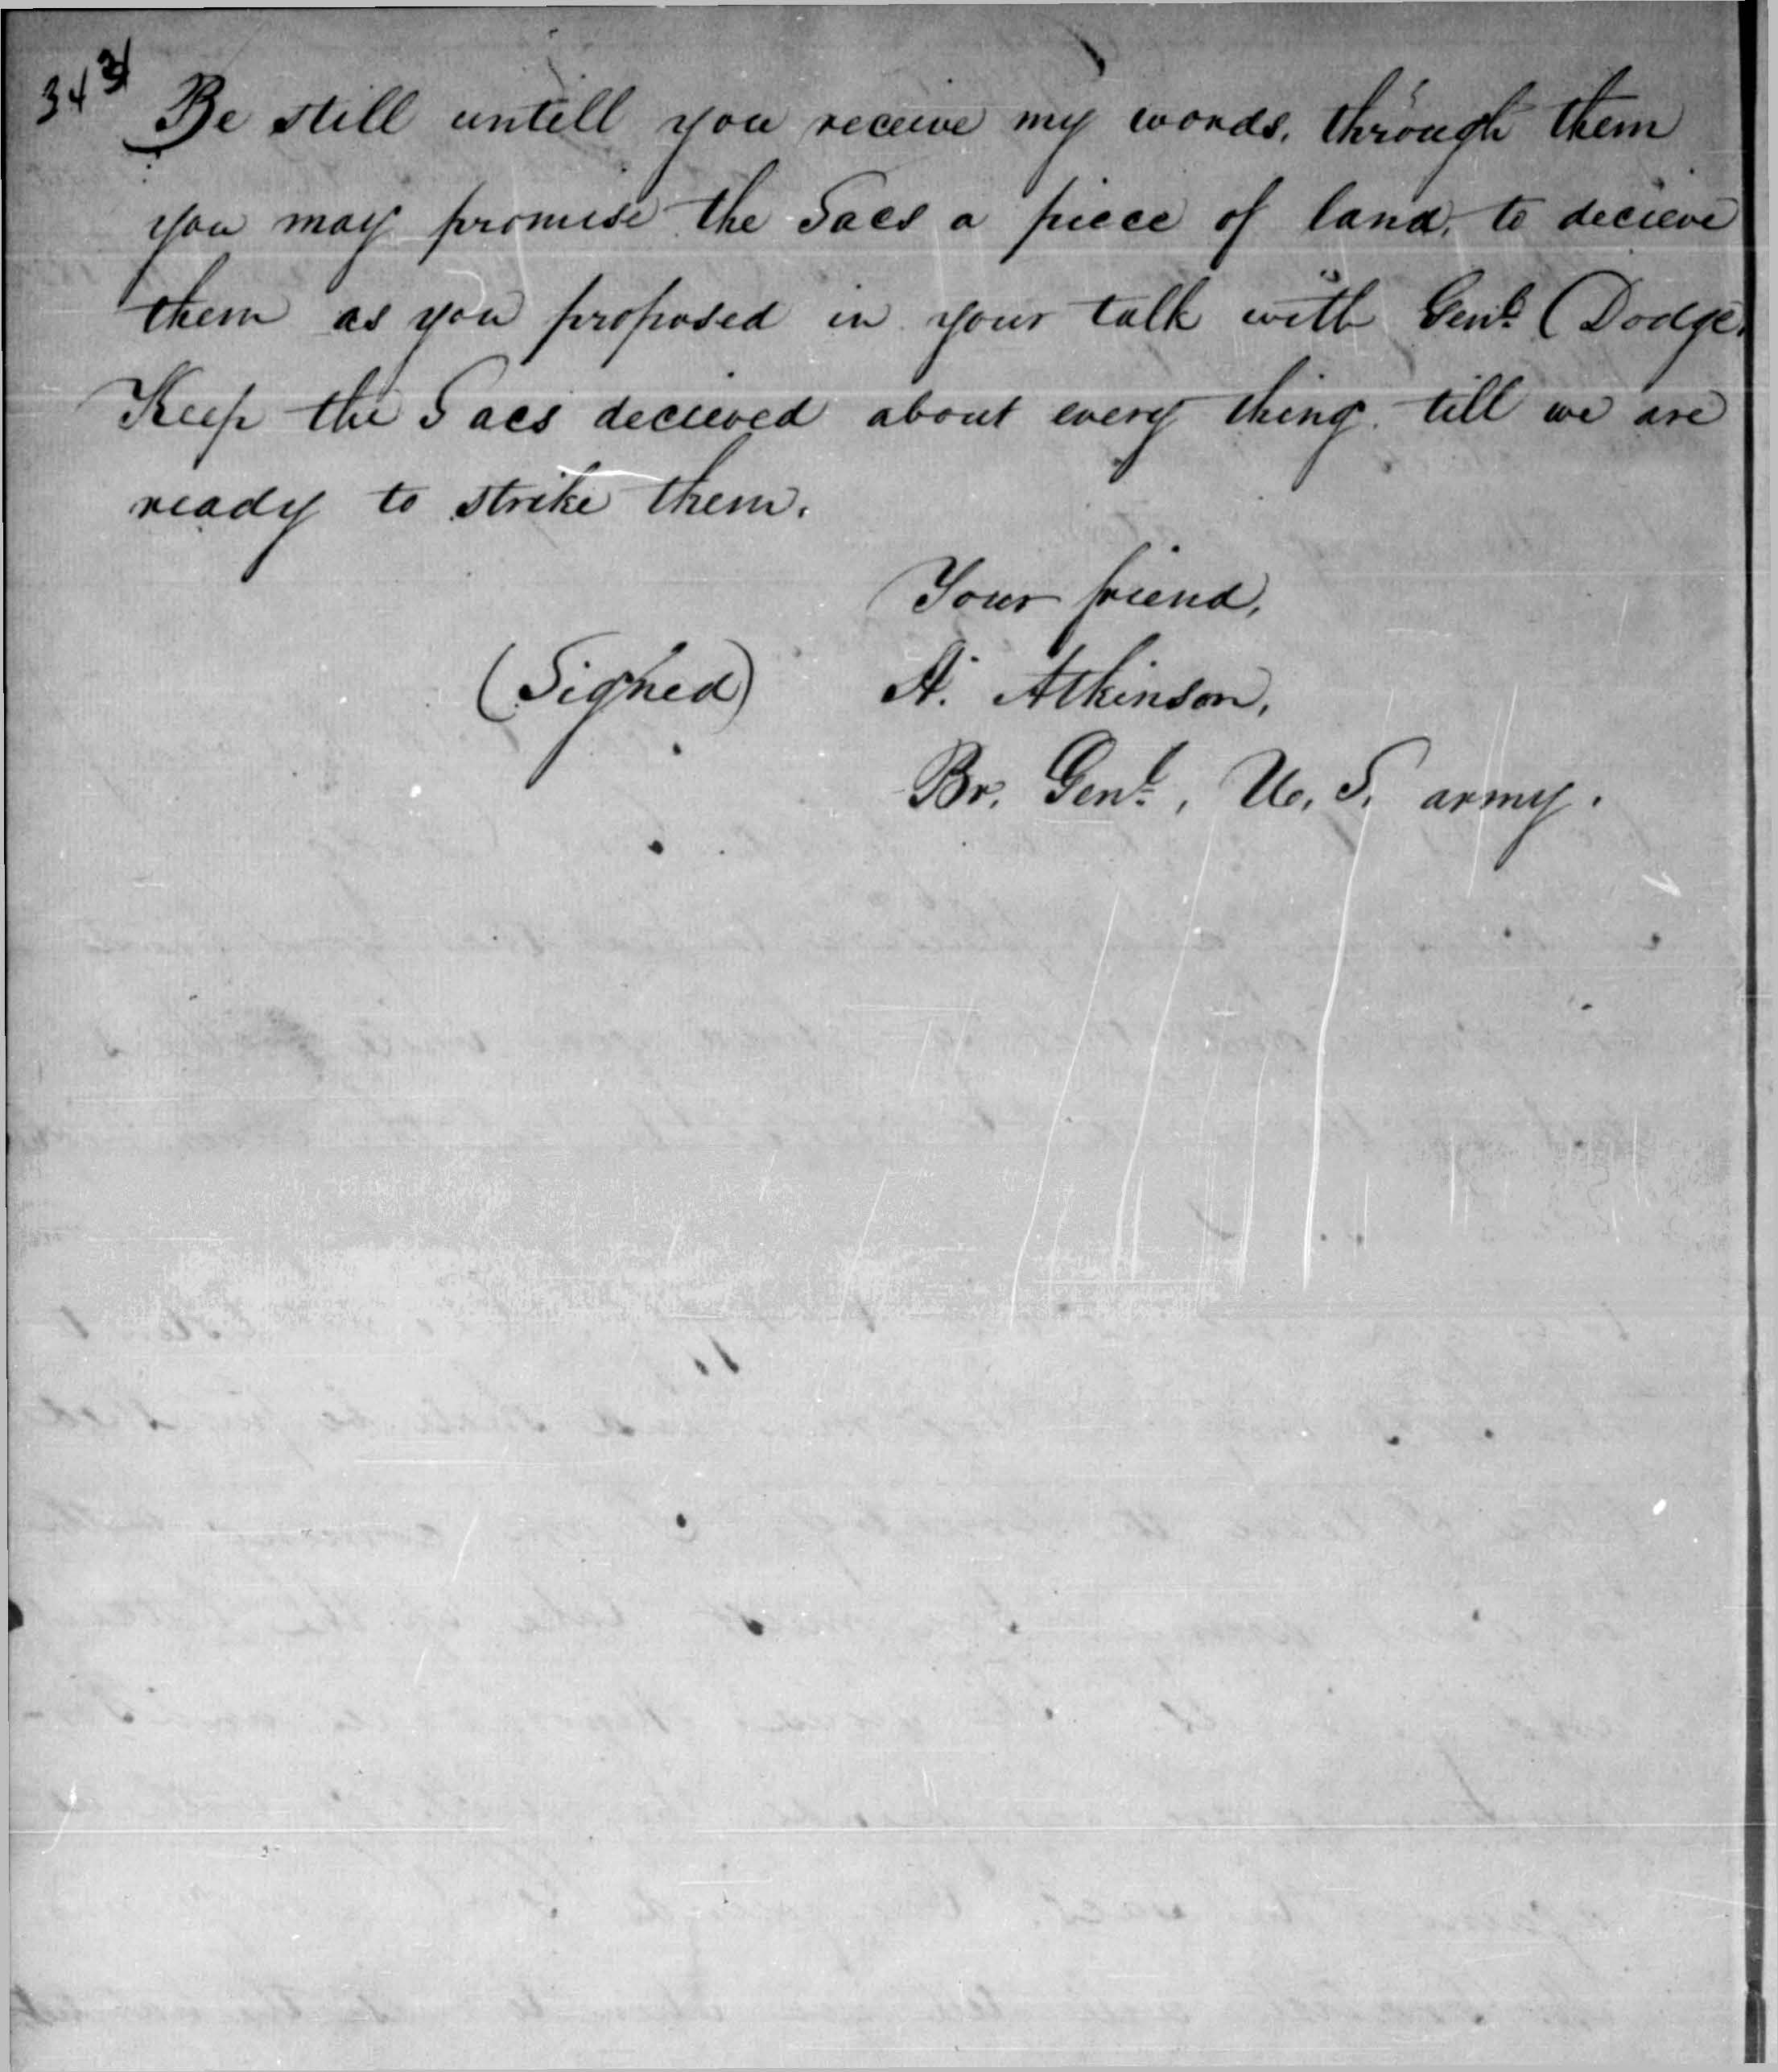 Letter from Henry Atkinson to Whirling Thunder, White Crow, and Other Chiefs and Braves of the Winnebago Nation, June 11, 1832, p. 1-2.